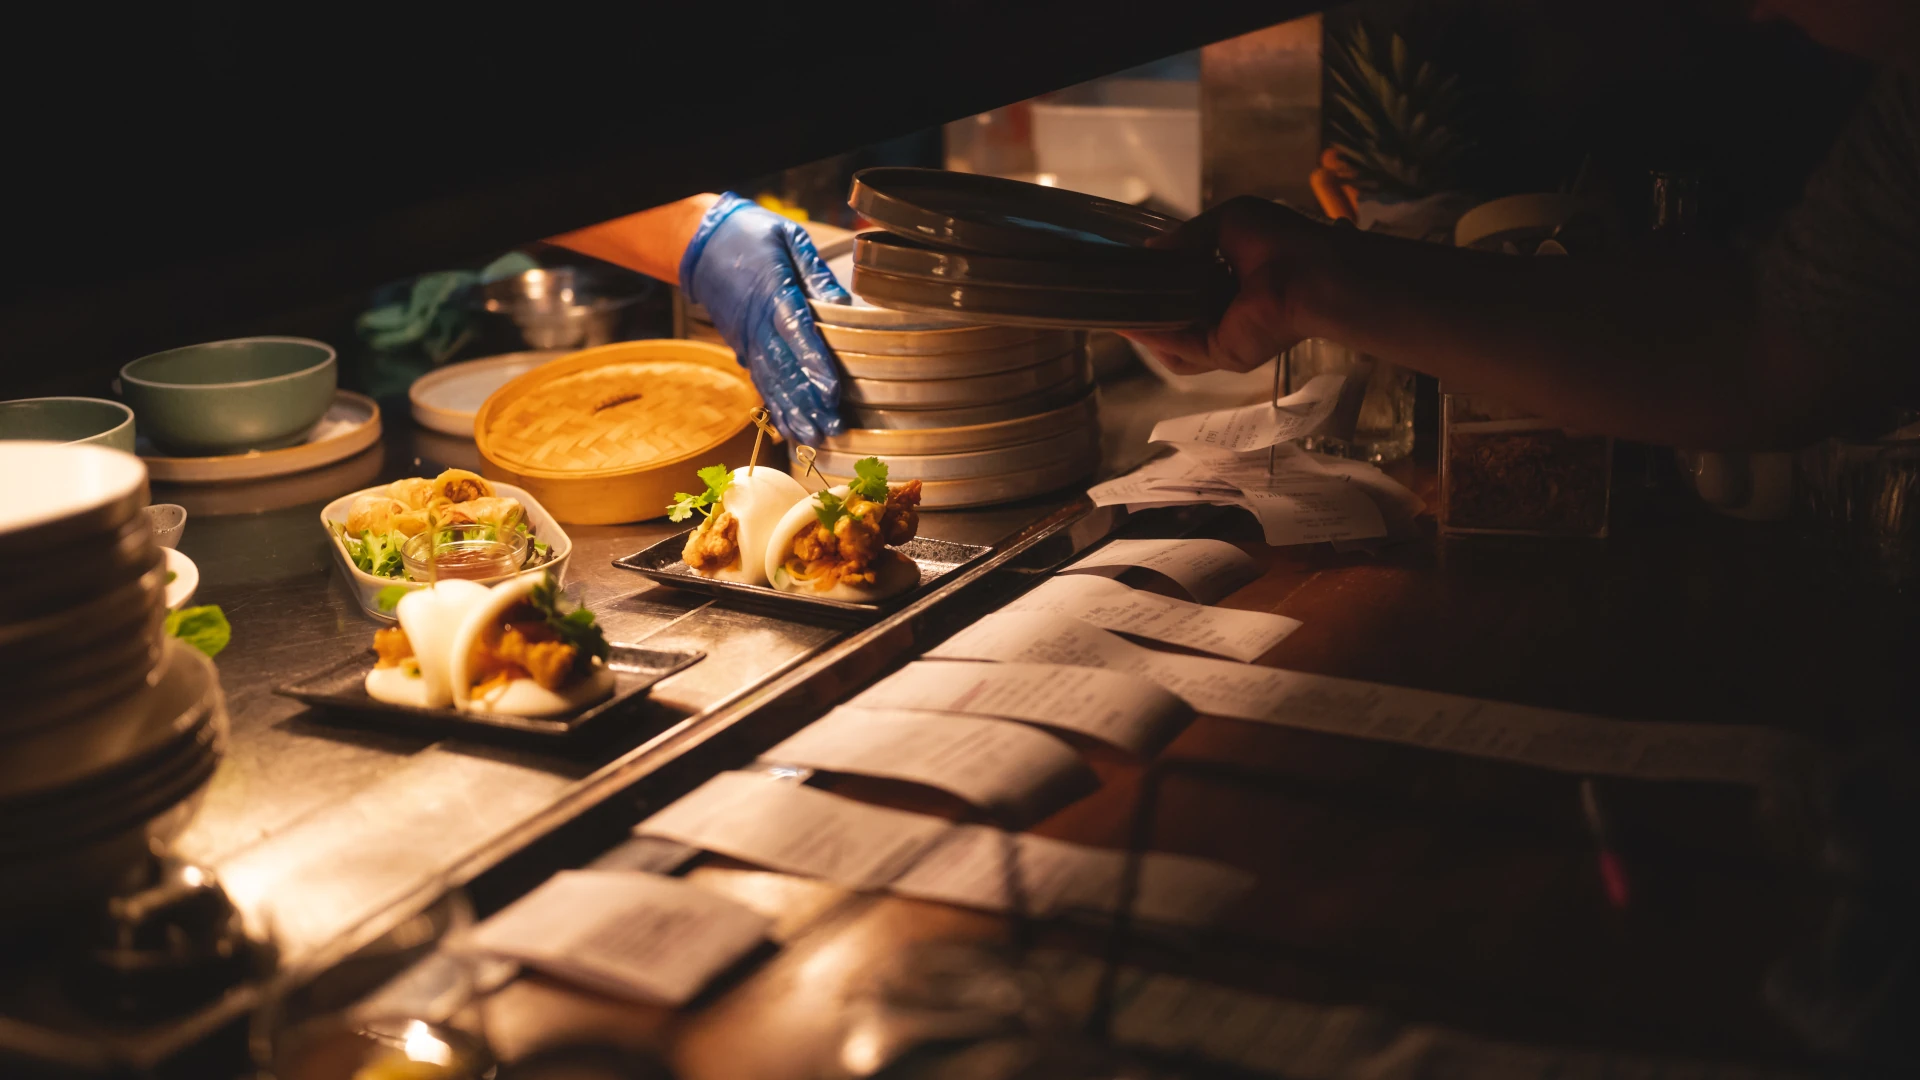 Delicious Bao being crafted and ready to serve at Mr Wabi.